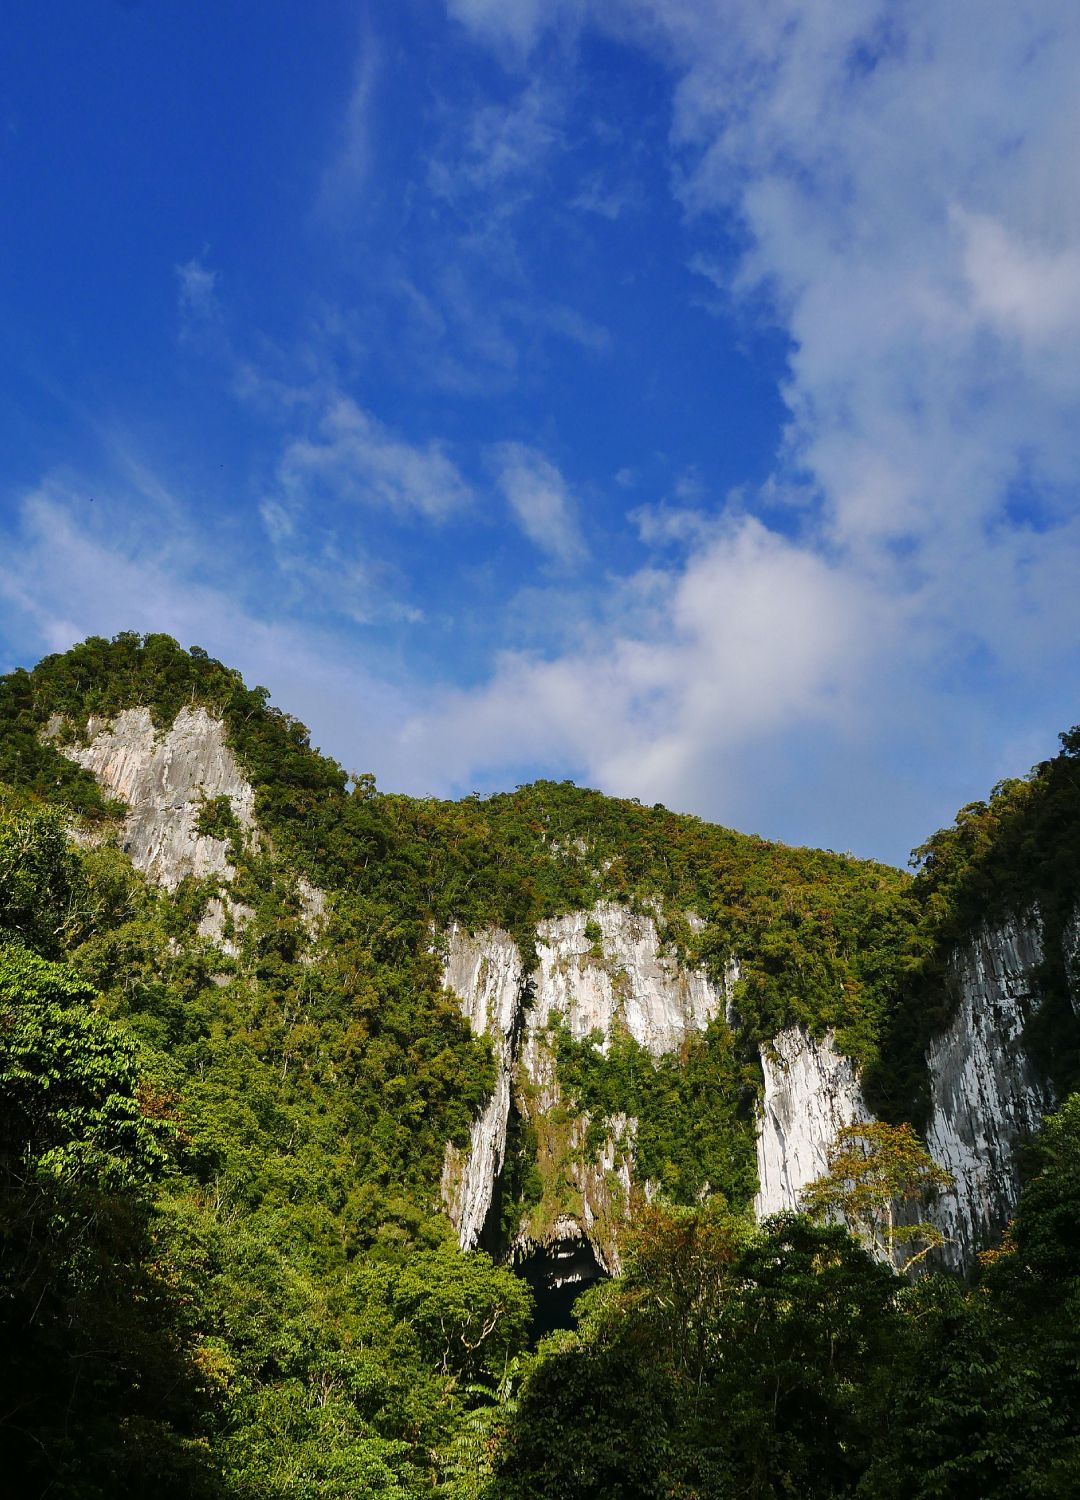 <p>                     The cliffs of Gunung Mulu National Park make for dramatic scenery for hikers. The park, which is situated in remote northeastern Sarawak, is incredibly biologically diverse, with over 3500 species of plants. Famed for its incredible caves, there are walking tours and hiking trails throughout the area, as well as guided wildlife tours.                   </p>